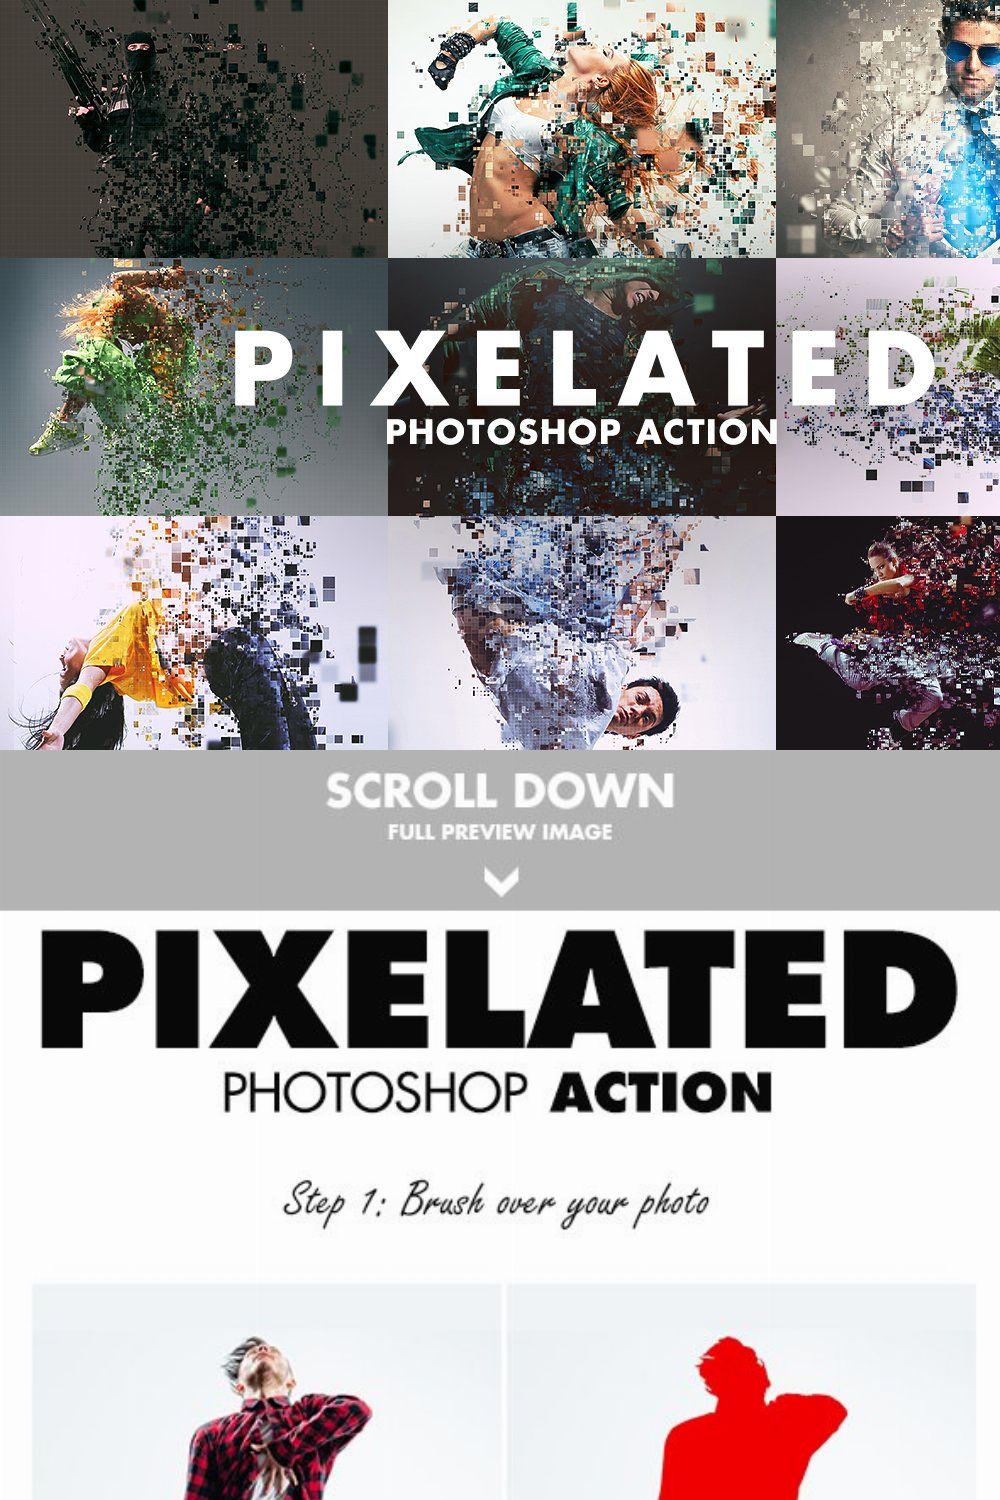 Pixelated Photoshop Action pinterest preview image.